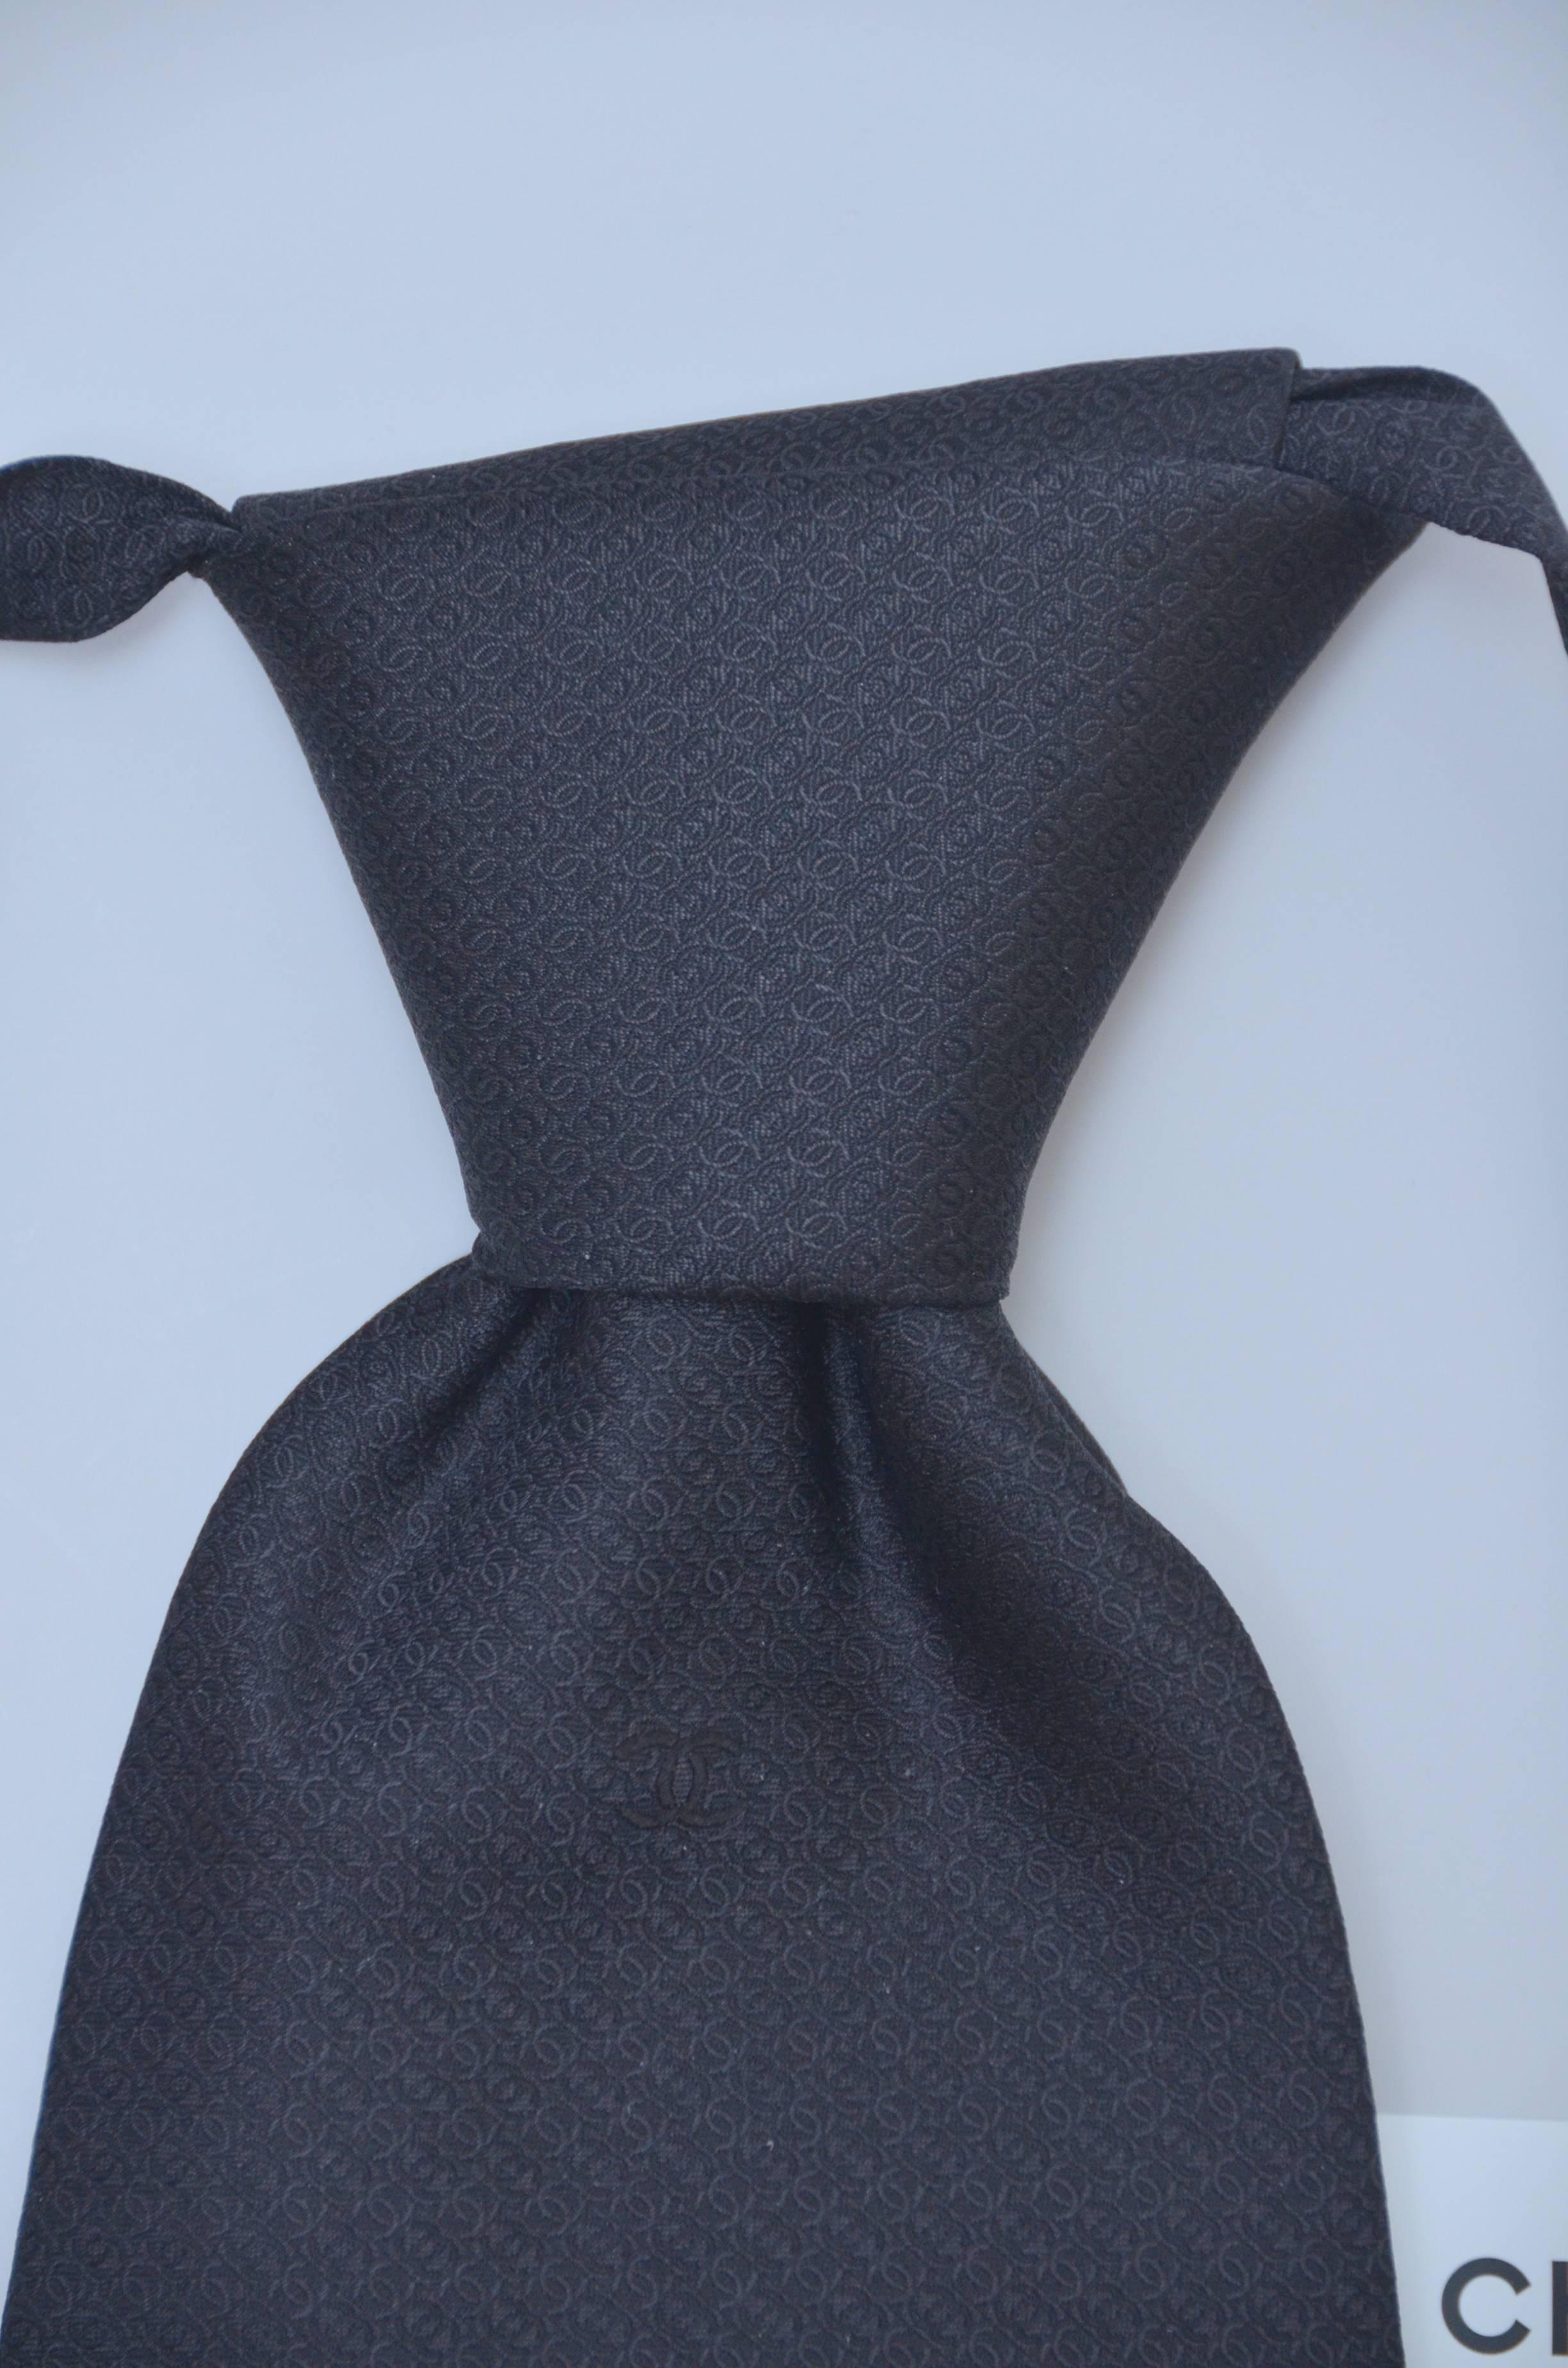 Chanel cruise collection Cuba 2016/17 runway black silk tie.
Discrete CC print on the fabric.
Mint like new condition without tags.
One size fit all.


Final Sale